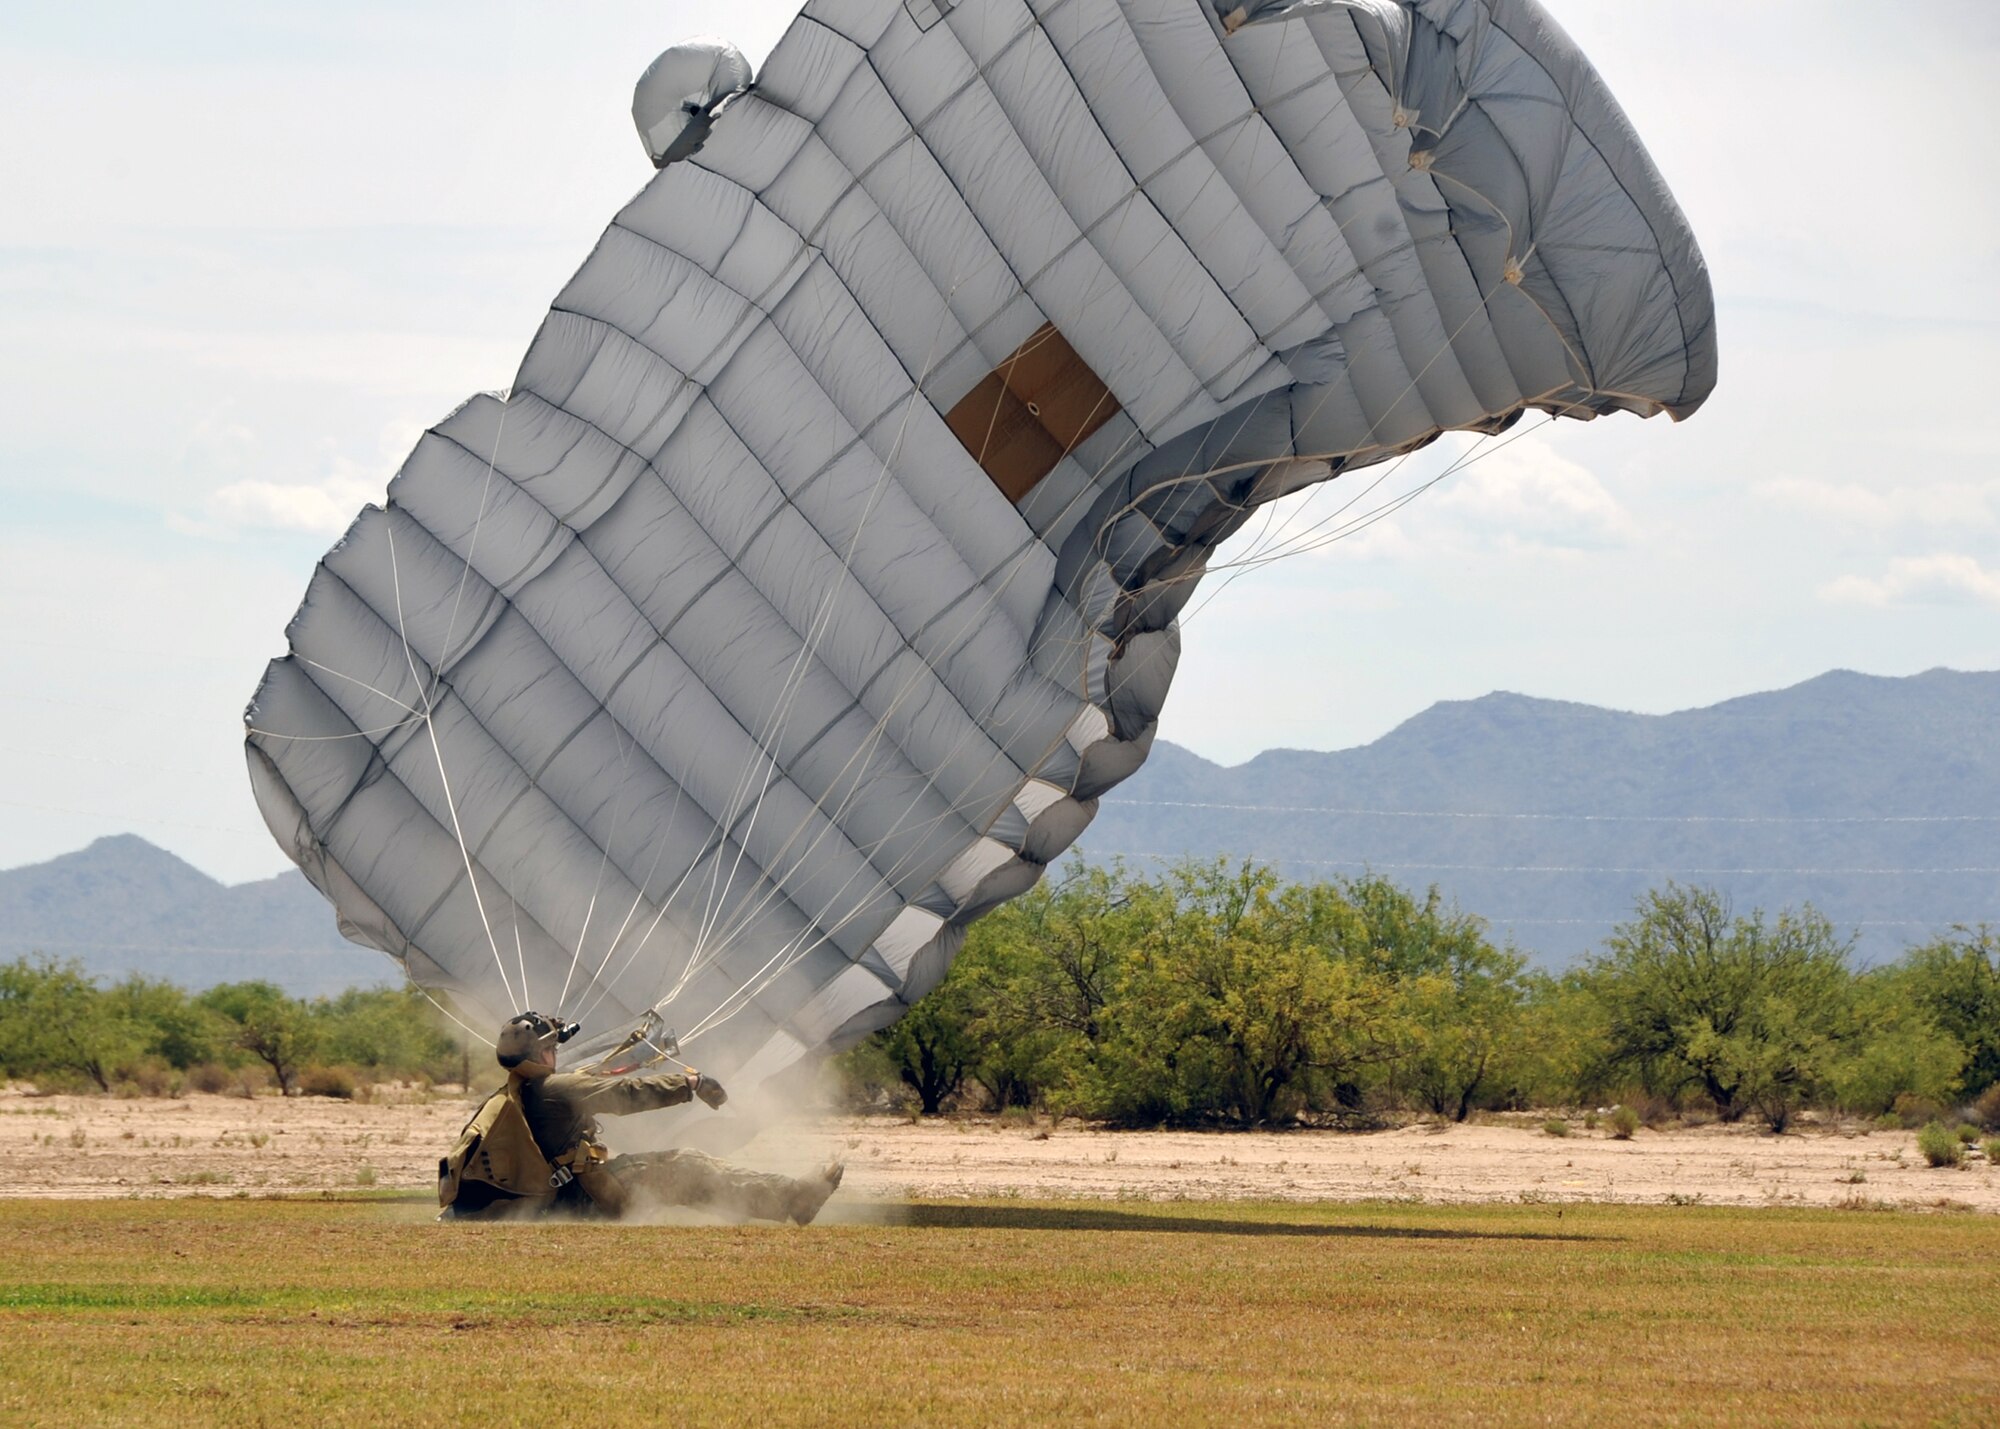 A U.S. Air Force Reserve pararescueman from the 306th Rescue Squadron lands in a skydiving field in Eloy, Ariz., during training May 14. Pararescuemen, also known as PJs, are the only Department of Defense elite combat forces specifically organized, trained, equipped and postured to conduct full-spectrum personnel recovery to include both conventional and unconventional combat rescue operations. These battlefield Airmen are the most highly trained and versatile personnel recovery specialists in the world. (U.S. Air Force photo by Tech. Sgt. Carolyn Herrick)